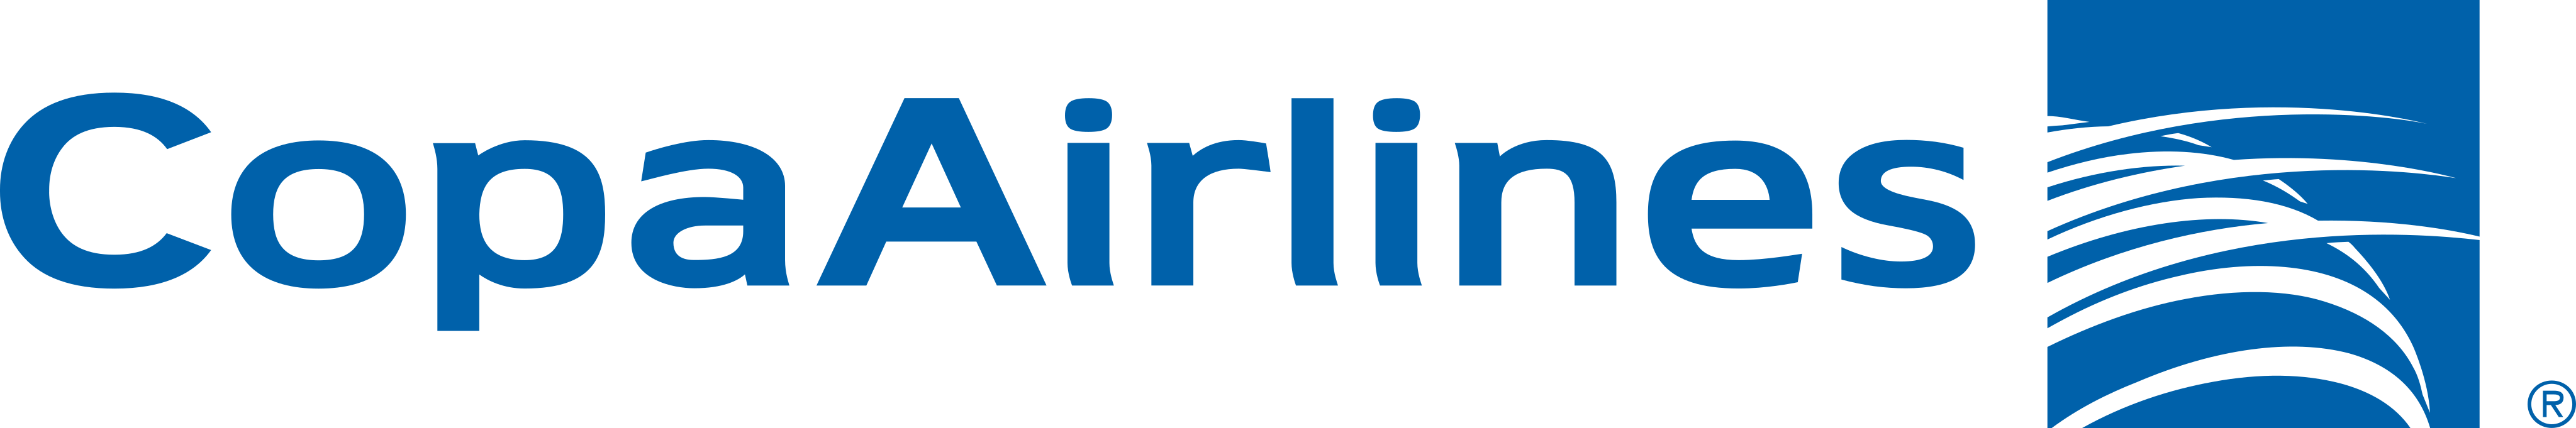 copa-airlines-logo.png